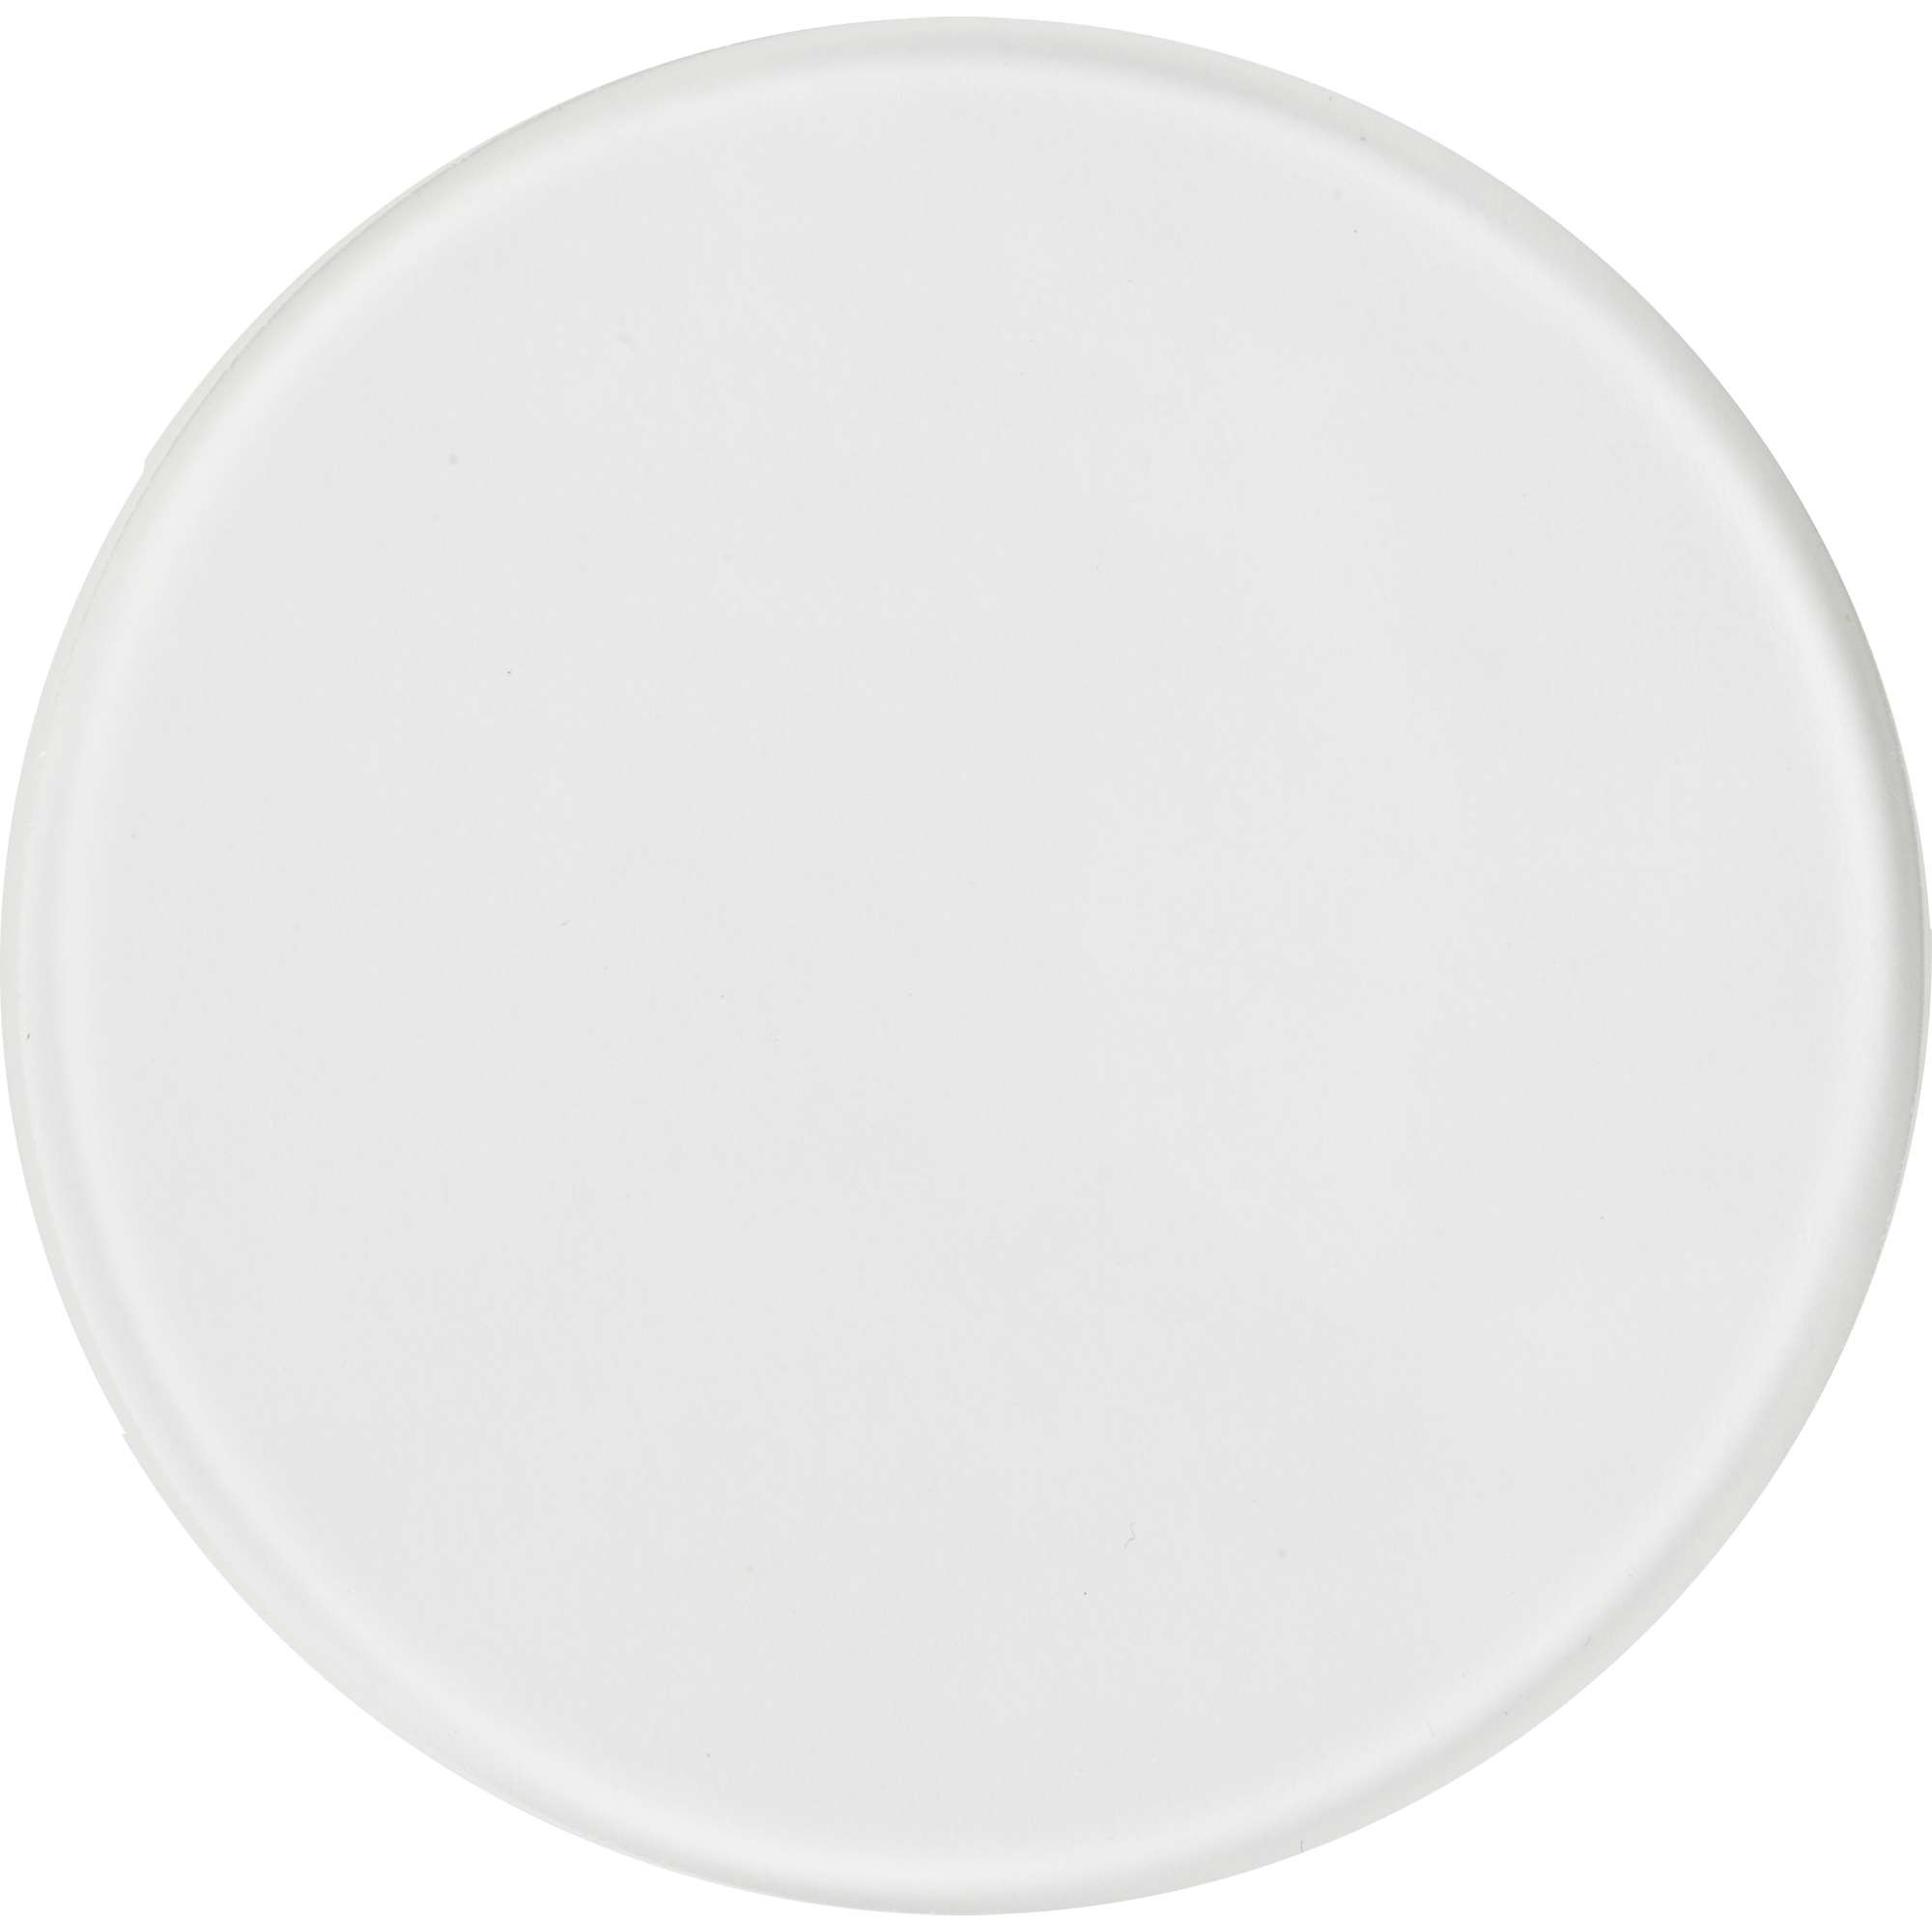 Profoto Glass Plate for Flat Front Clear, 331525